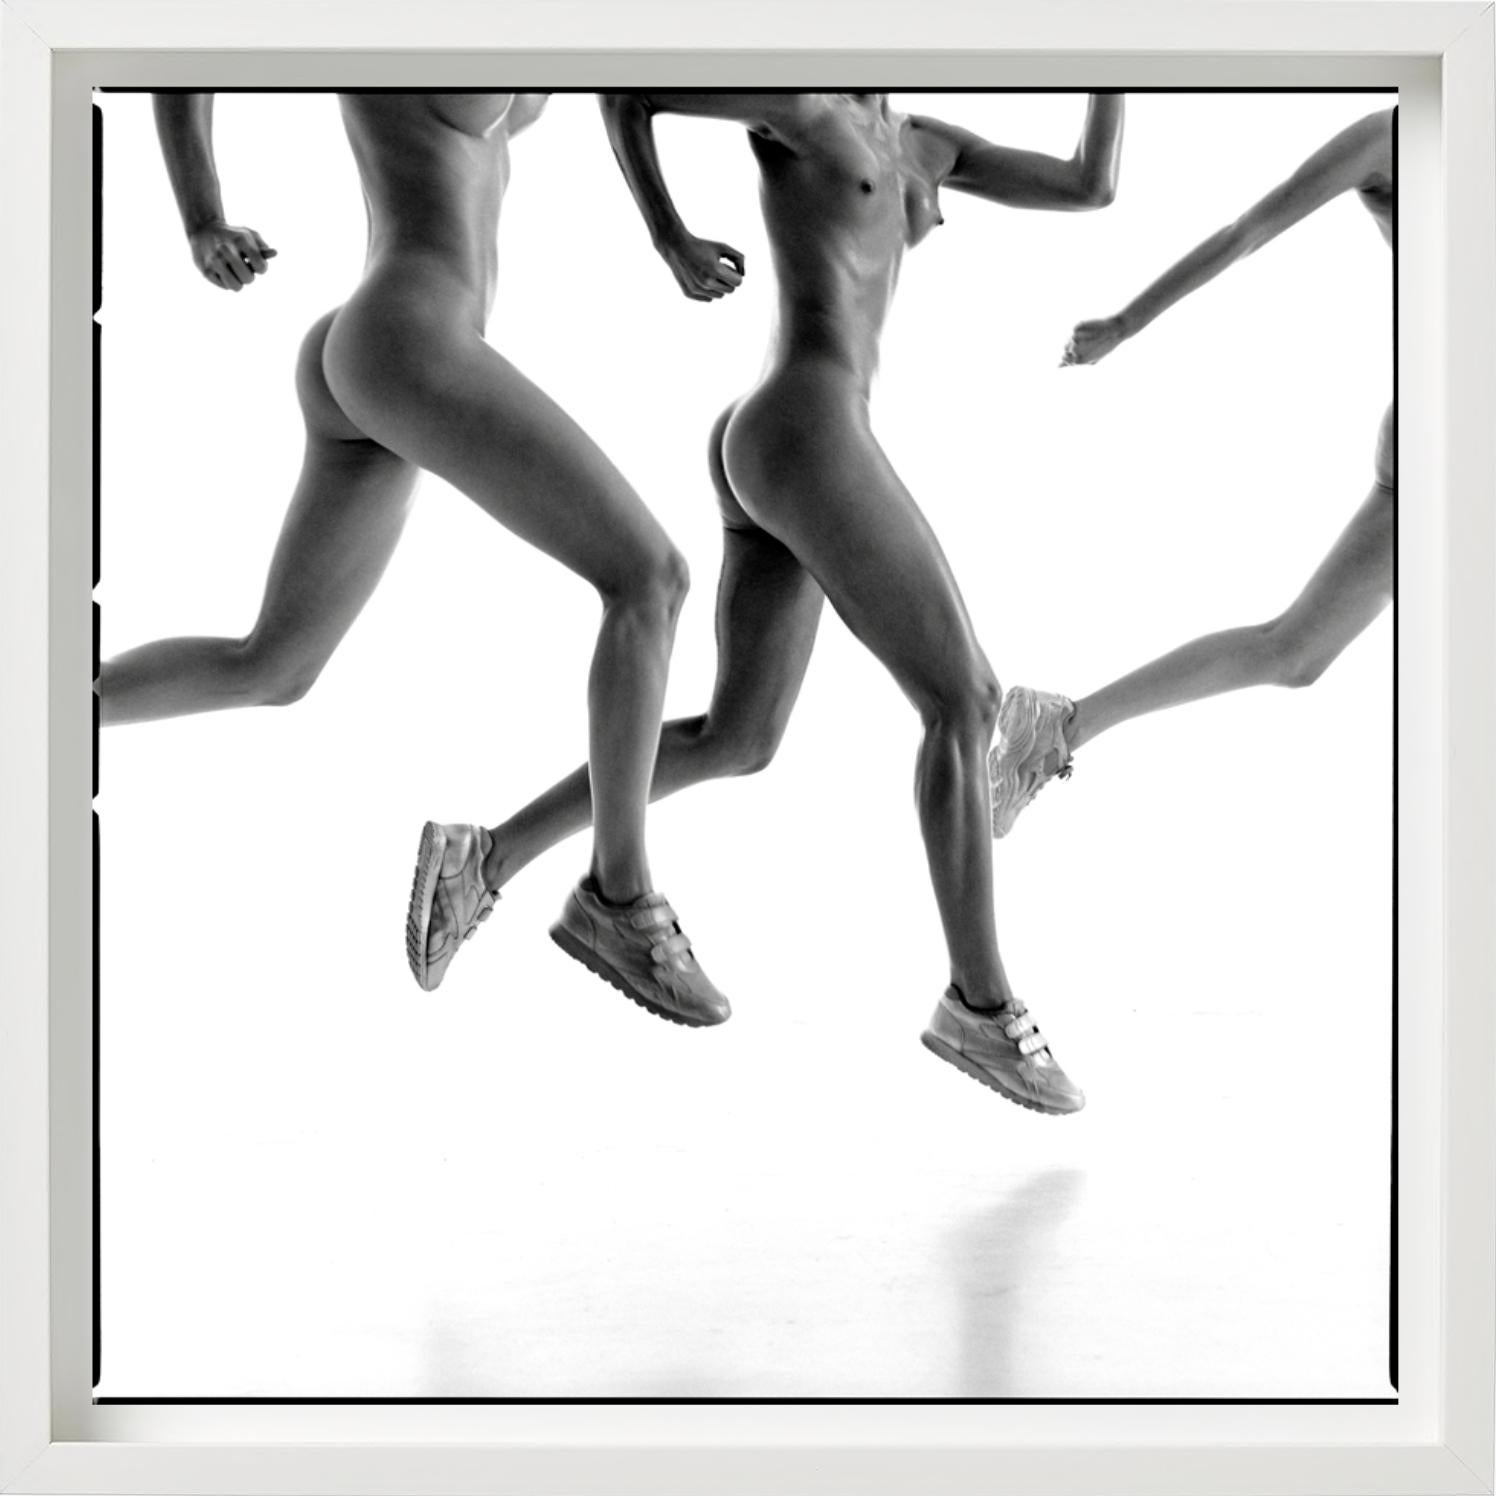 Olympic, Three Girls running - nude athletes running, fine art photography - Photograph by Guido Argentini